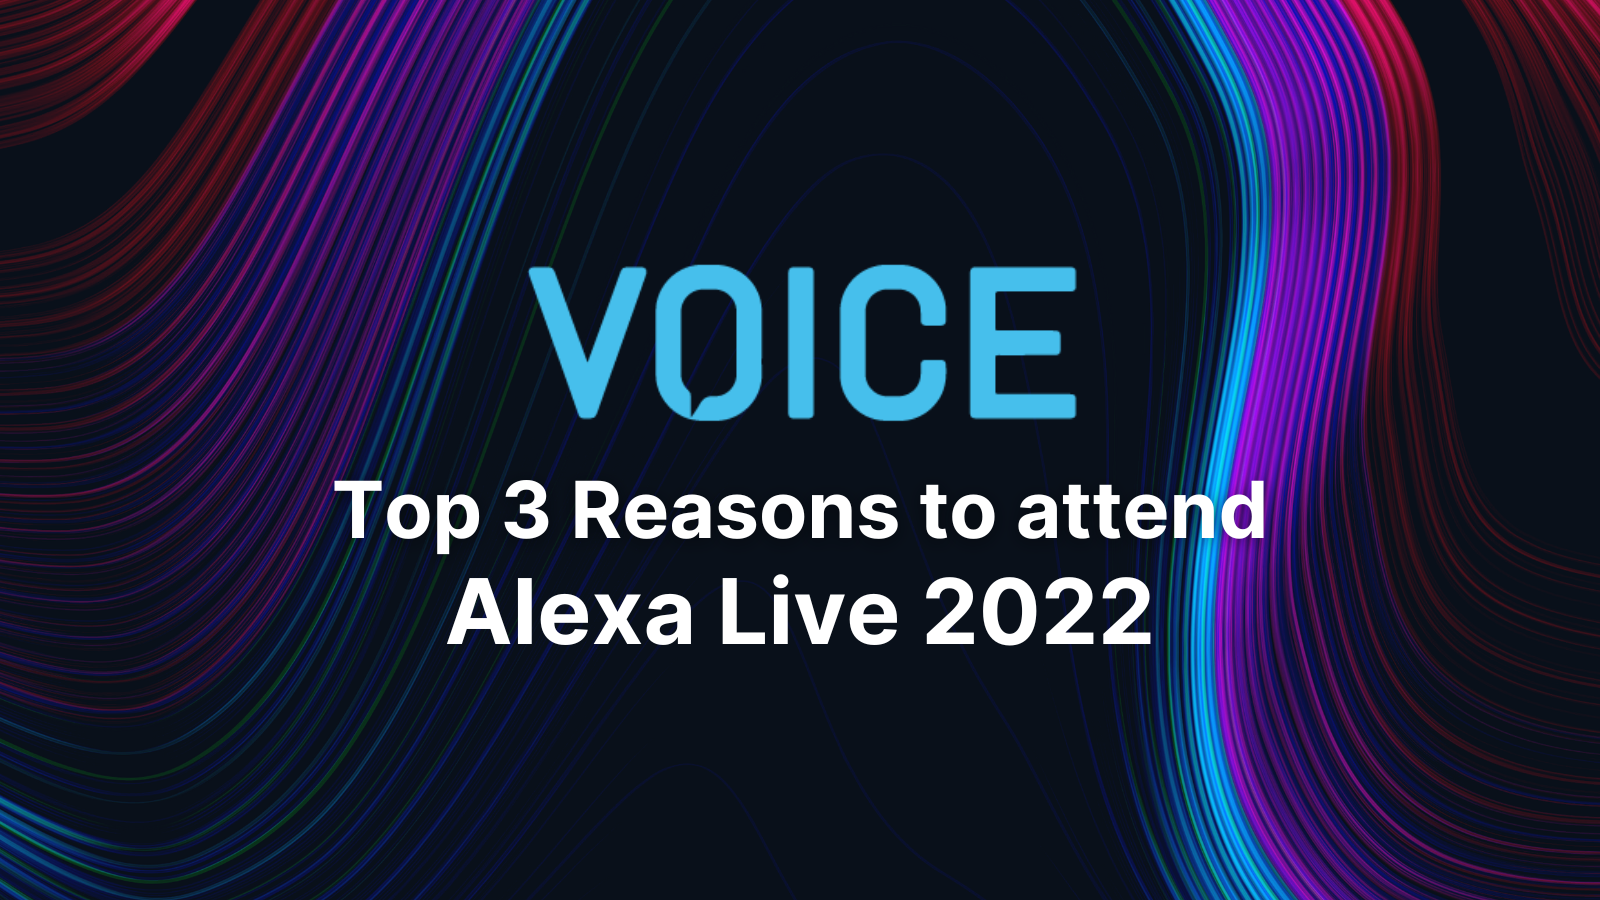 Top 3 Reasons to attend Alexa Live 2022